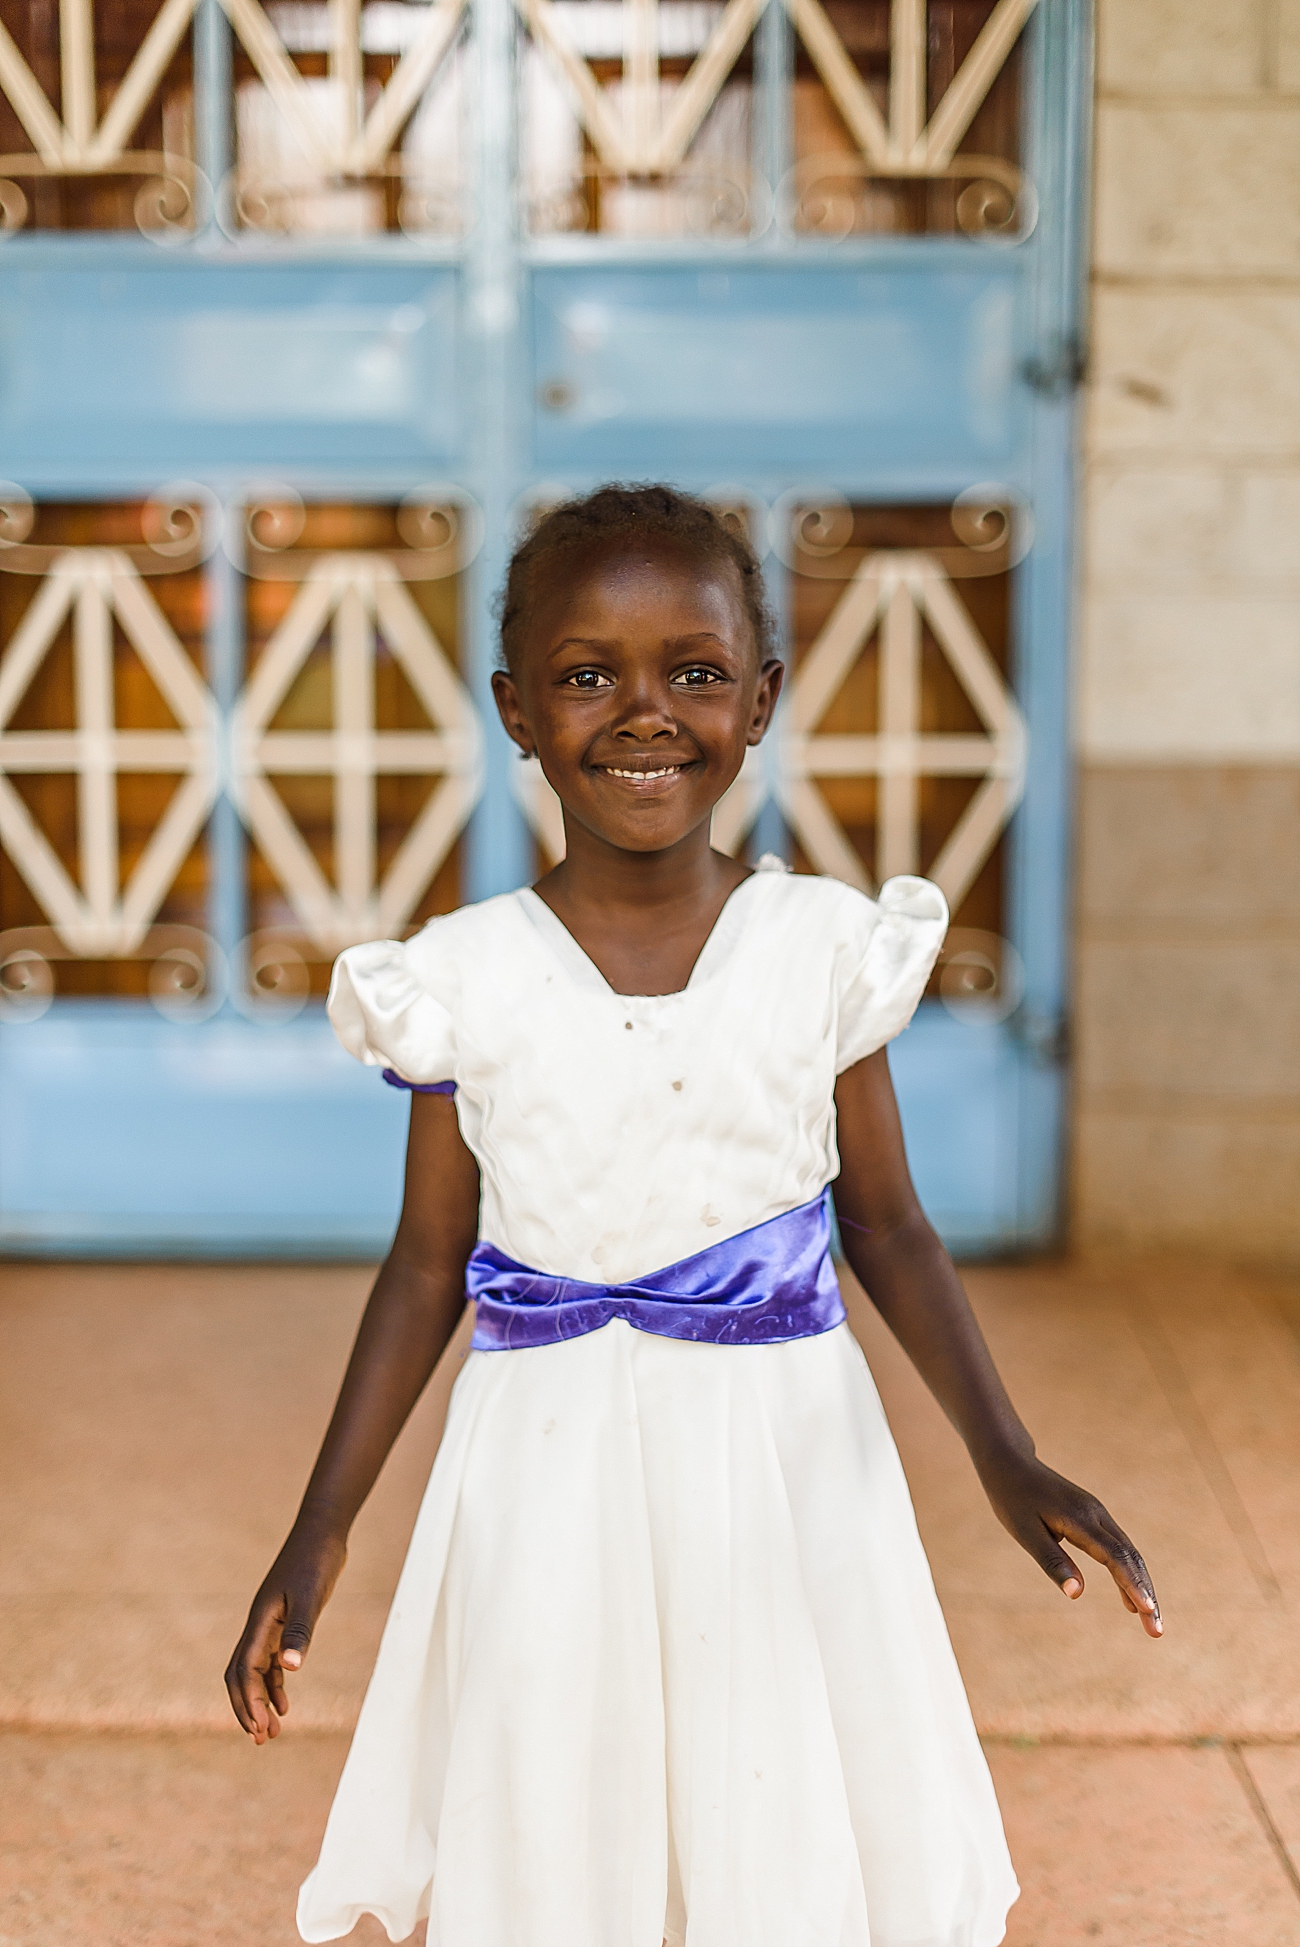 Ann - Available for Sponsorship through Compassion International: https://www.compassion.com/sponsor_a_child/child-biography.htm?gid=08995664&source=594497